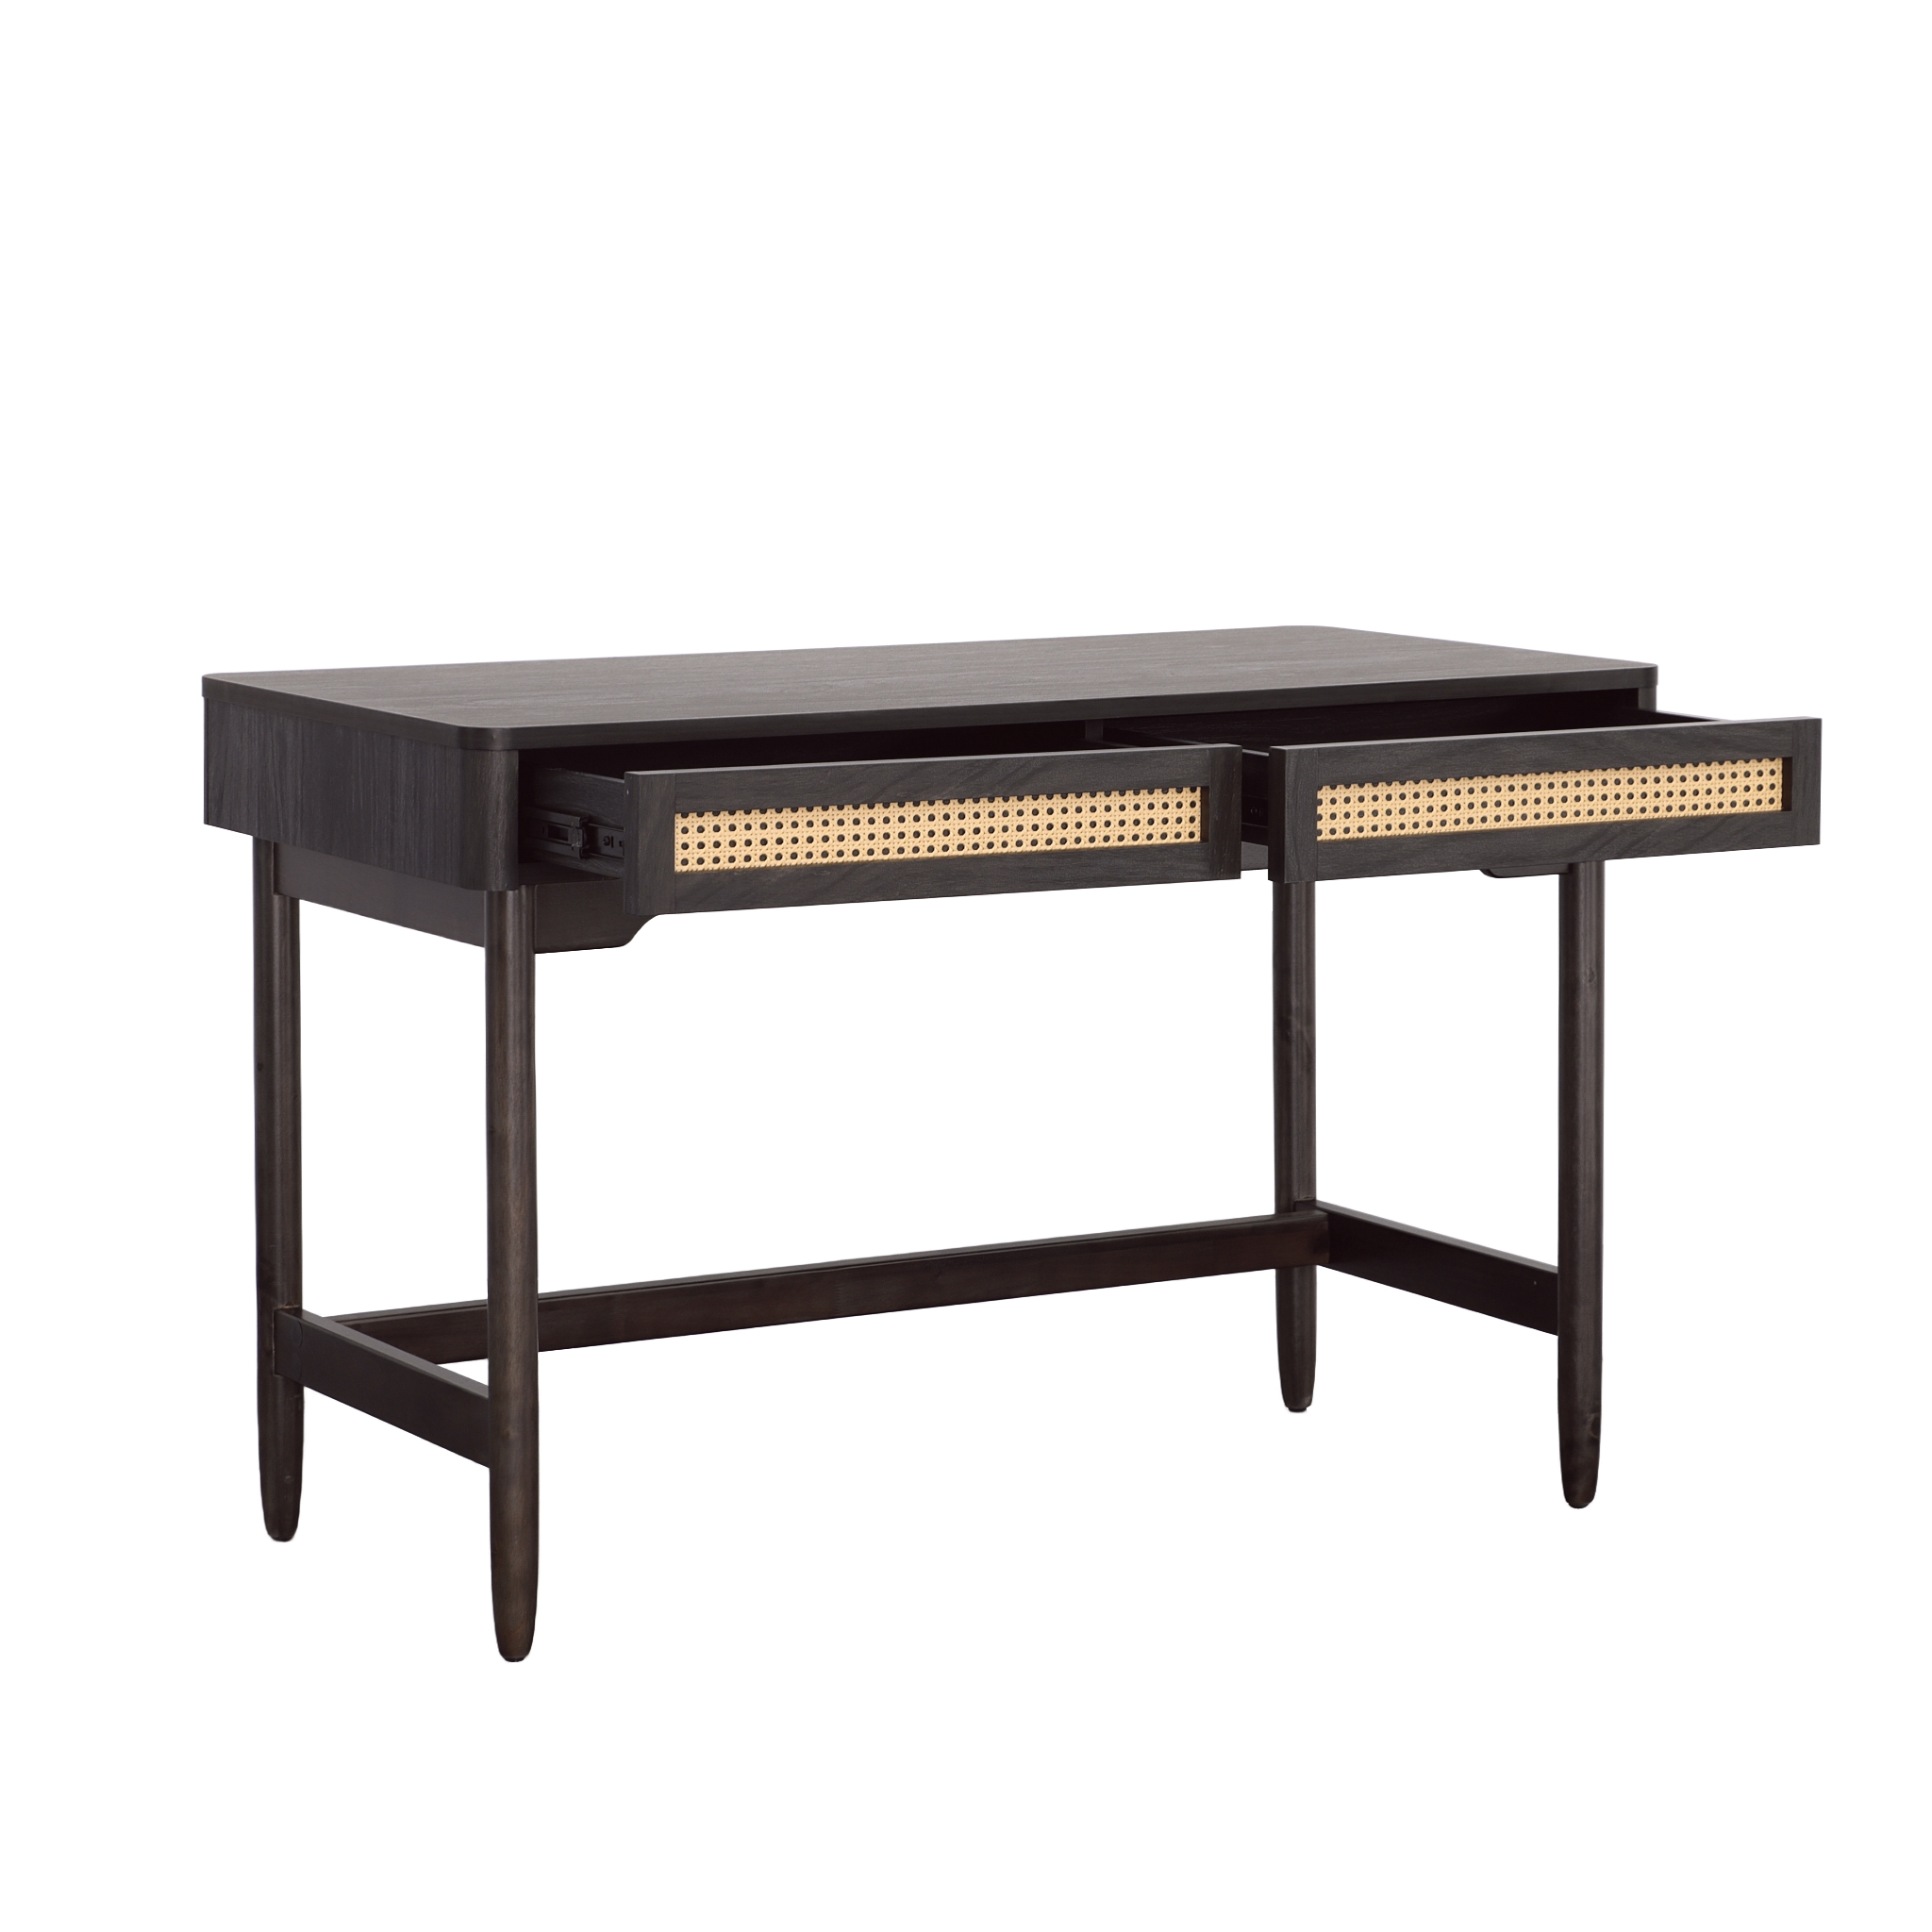 Better Homes & Gardens Springwood Caning Desk, Charcoal Finish - image 5 of 12